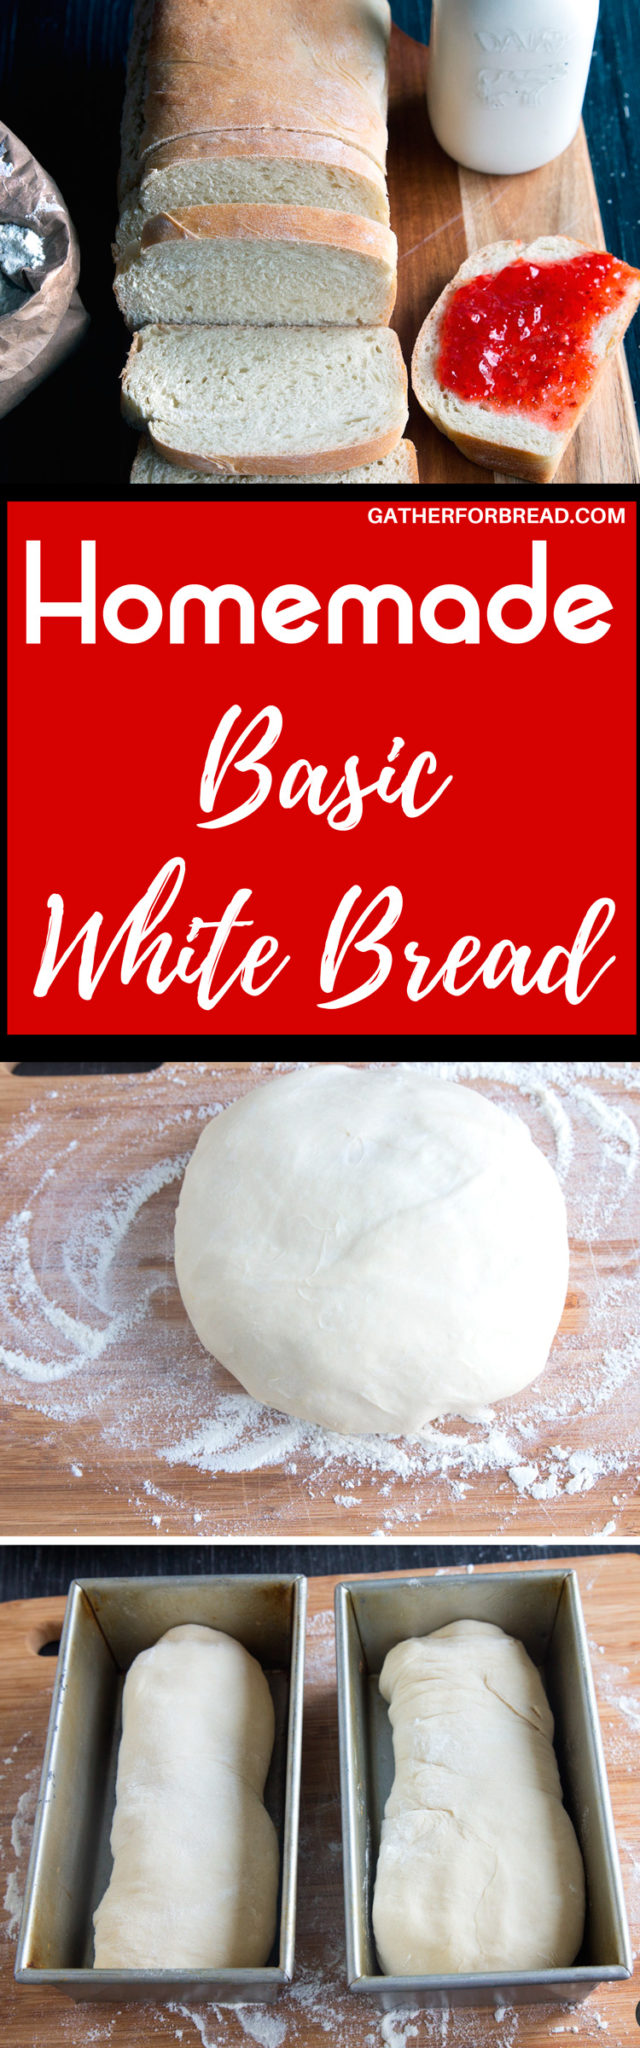 Basic Homemade White Bread - Simple and easy homemade white bread made with all purpose flour. This loaf is perfect for sandwiches, toast or to slather with jelly.